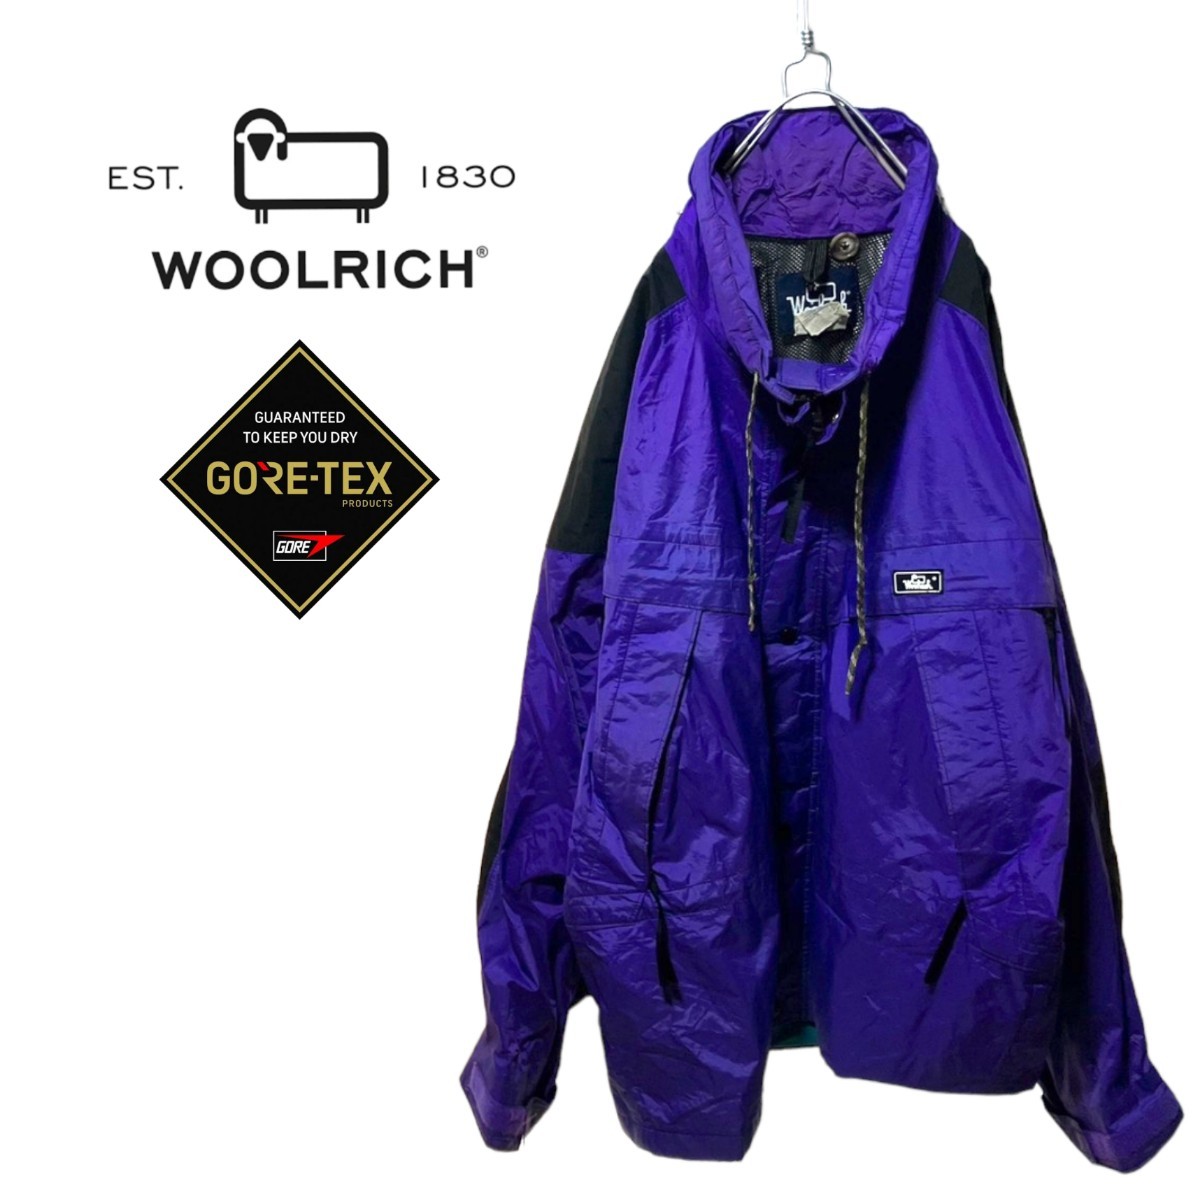 【WOOLRICH】80's GORE-TEX マウンテンパーカー A-439